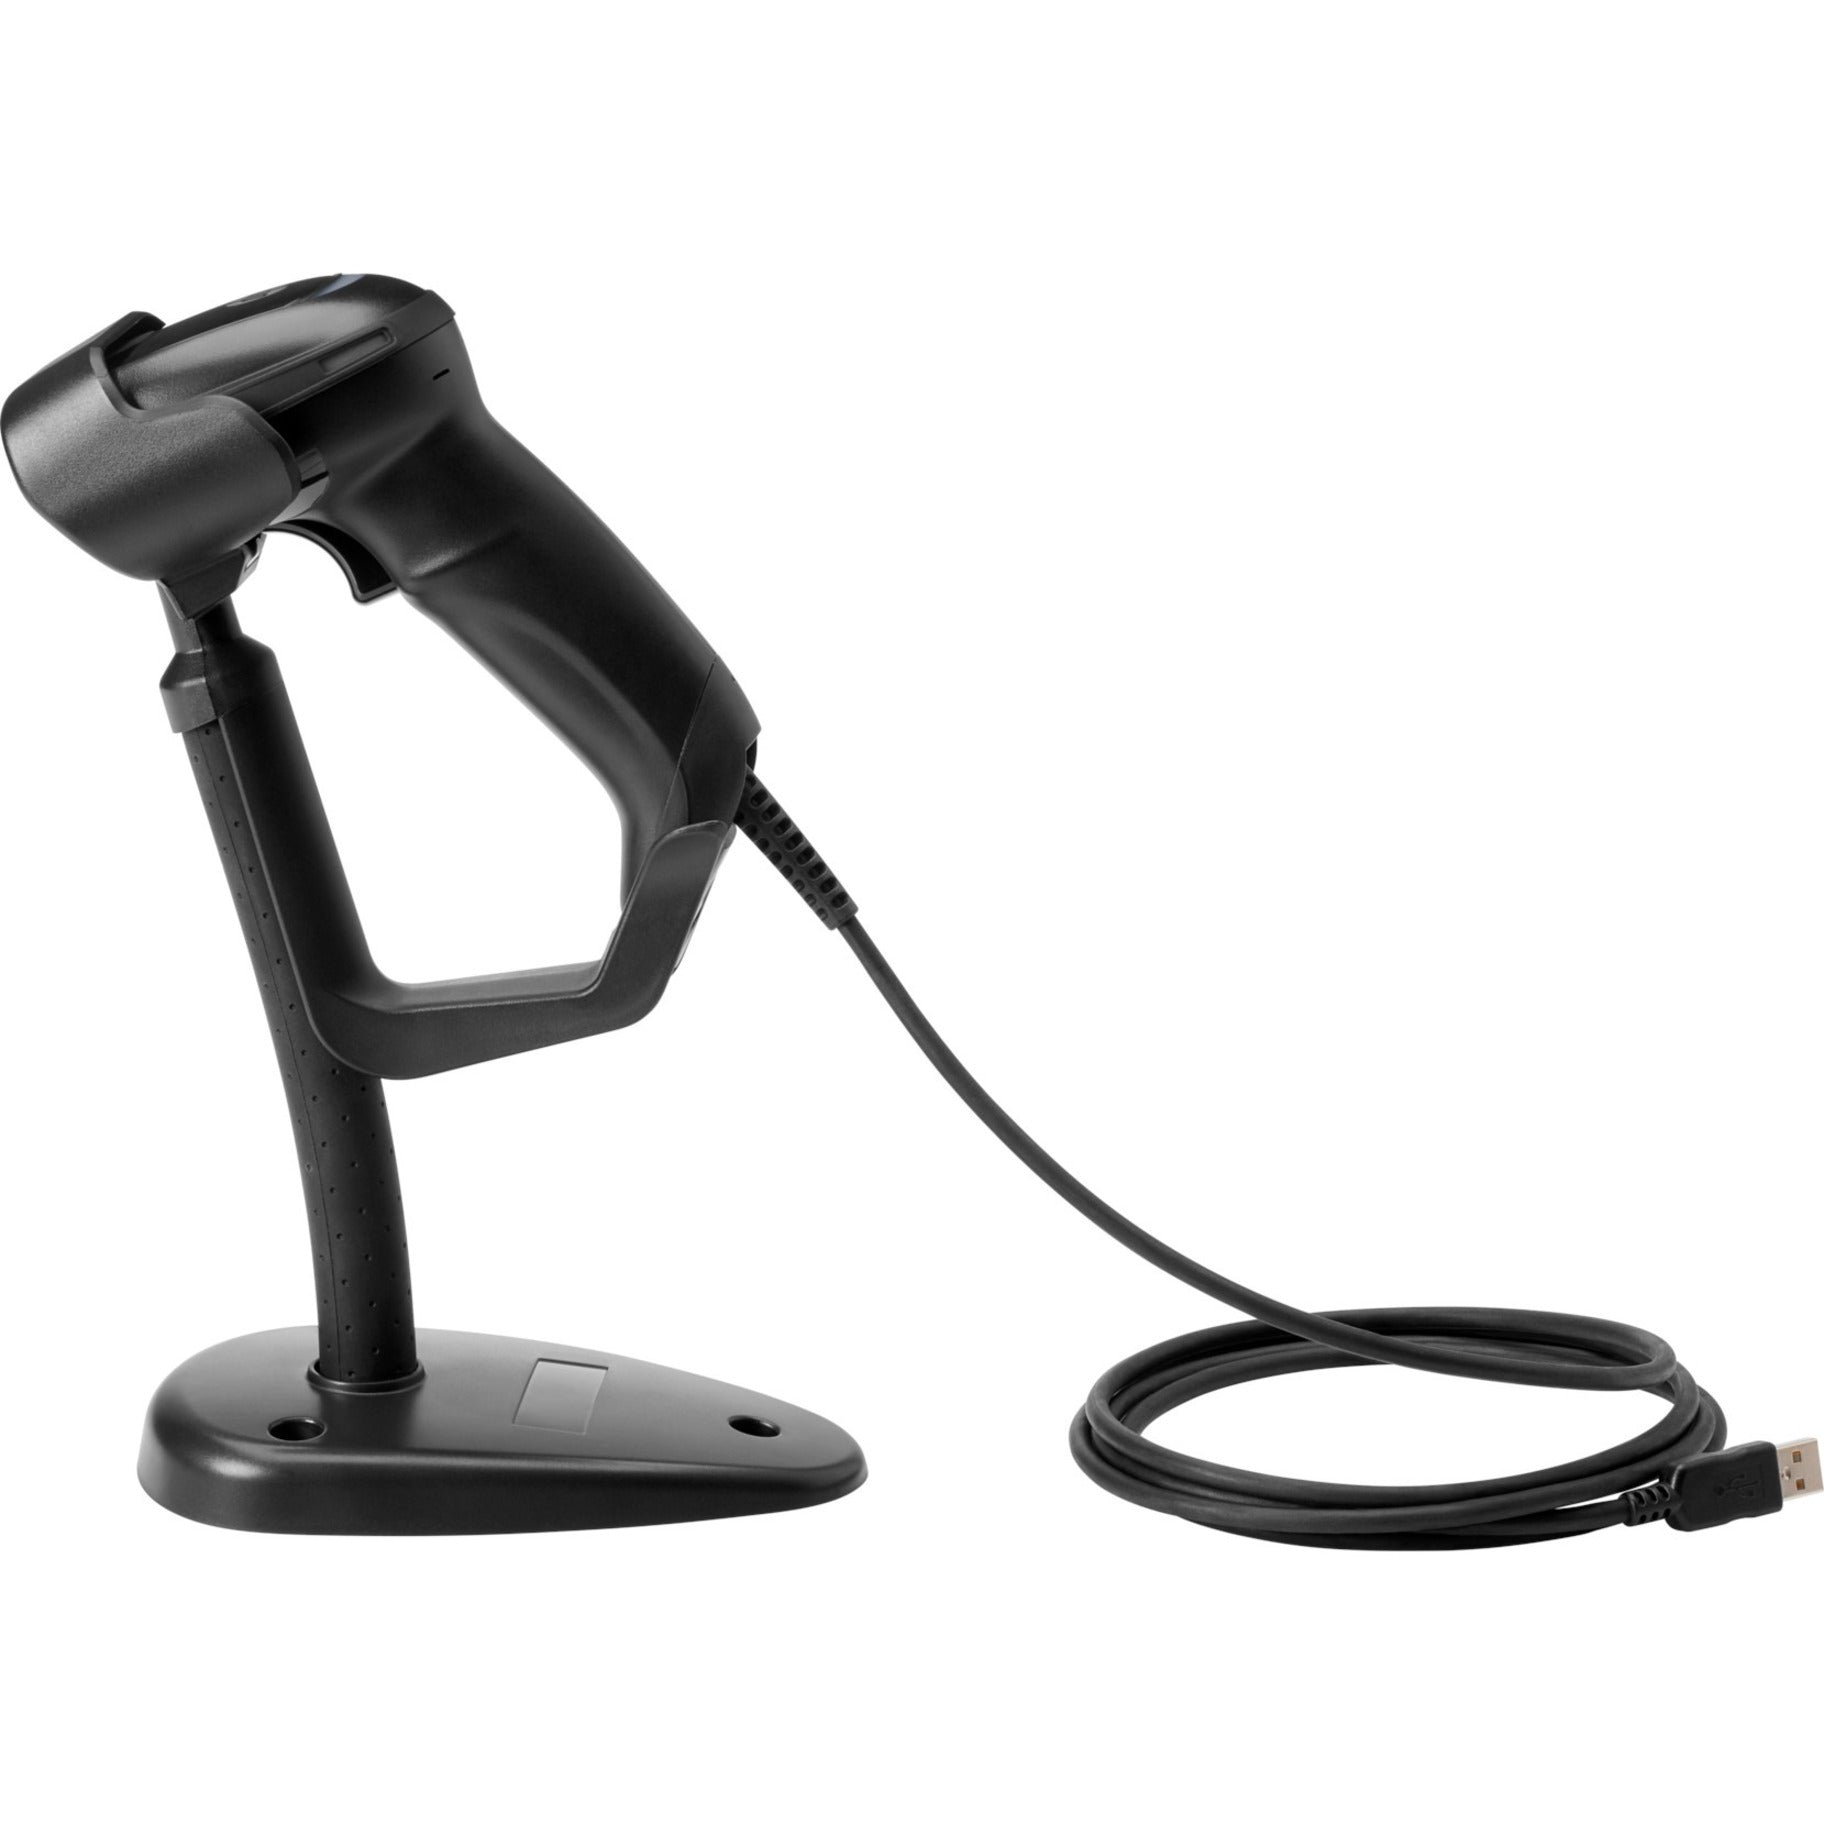 HP 5YQ08AT Engage Imaging Barcode Scanner II, Omni-directional 2D/1D Cable Barcode Scanner